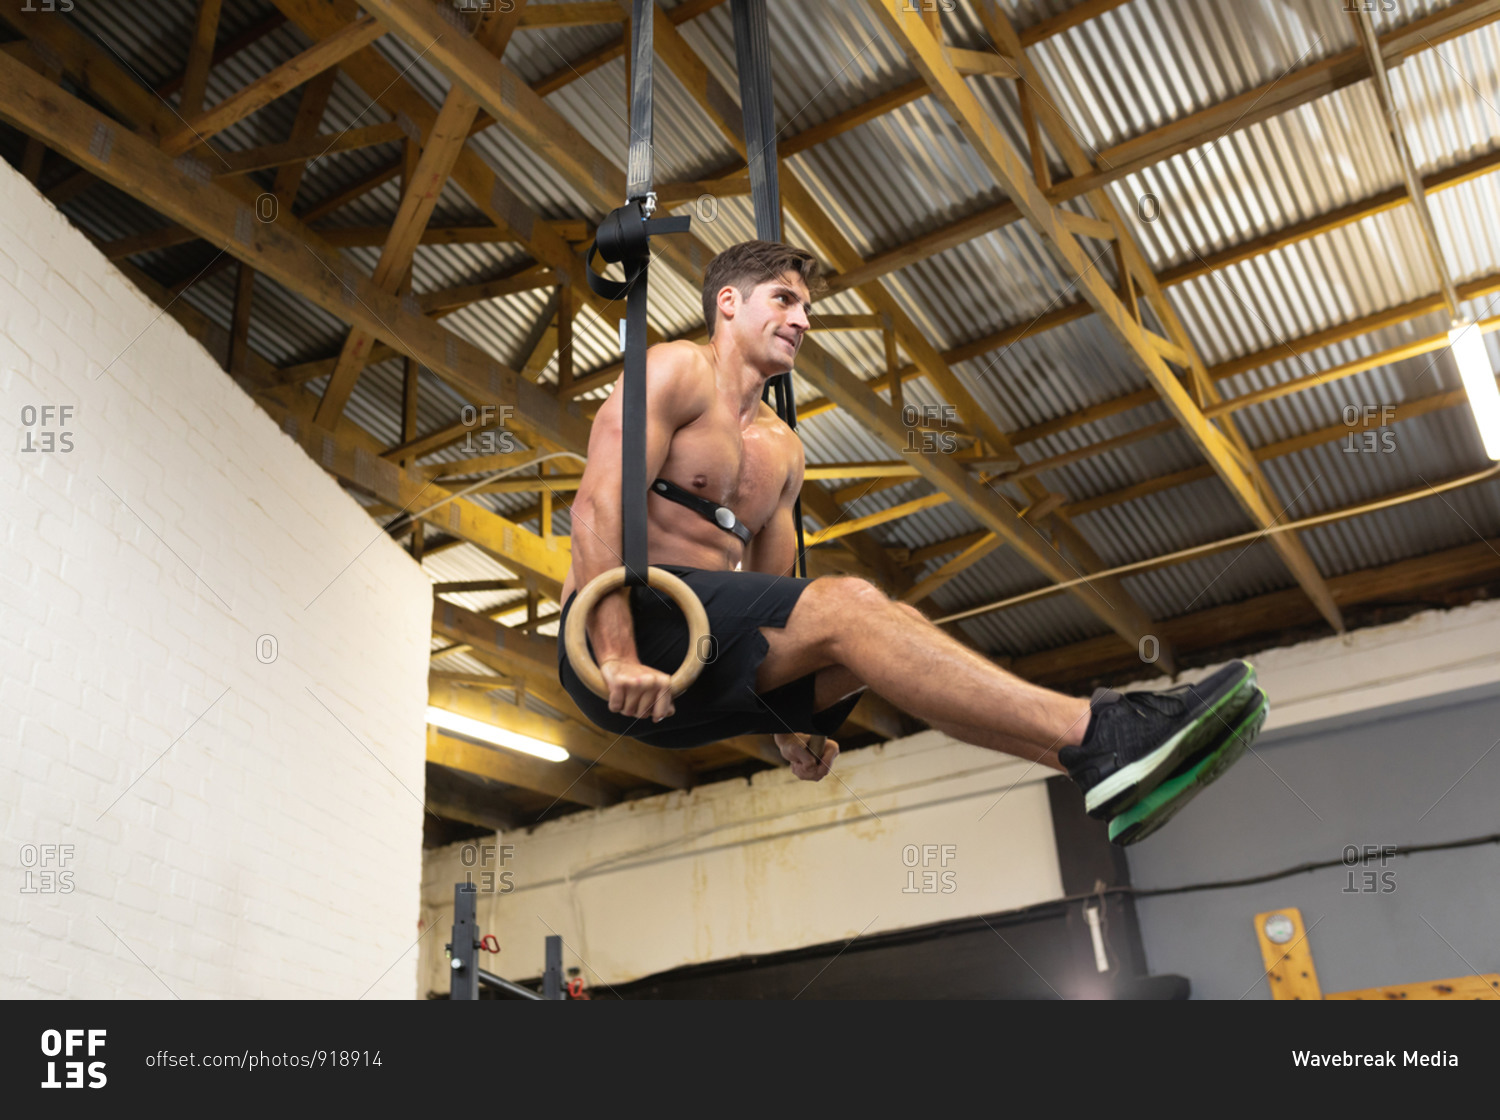 Side view of a shirtless athletic Caucasian man wearing a chest strap heart rate monitor cross training at a gym, lifting himself up on gymnastic rings with legs up